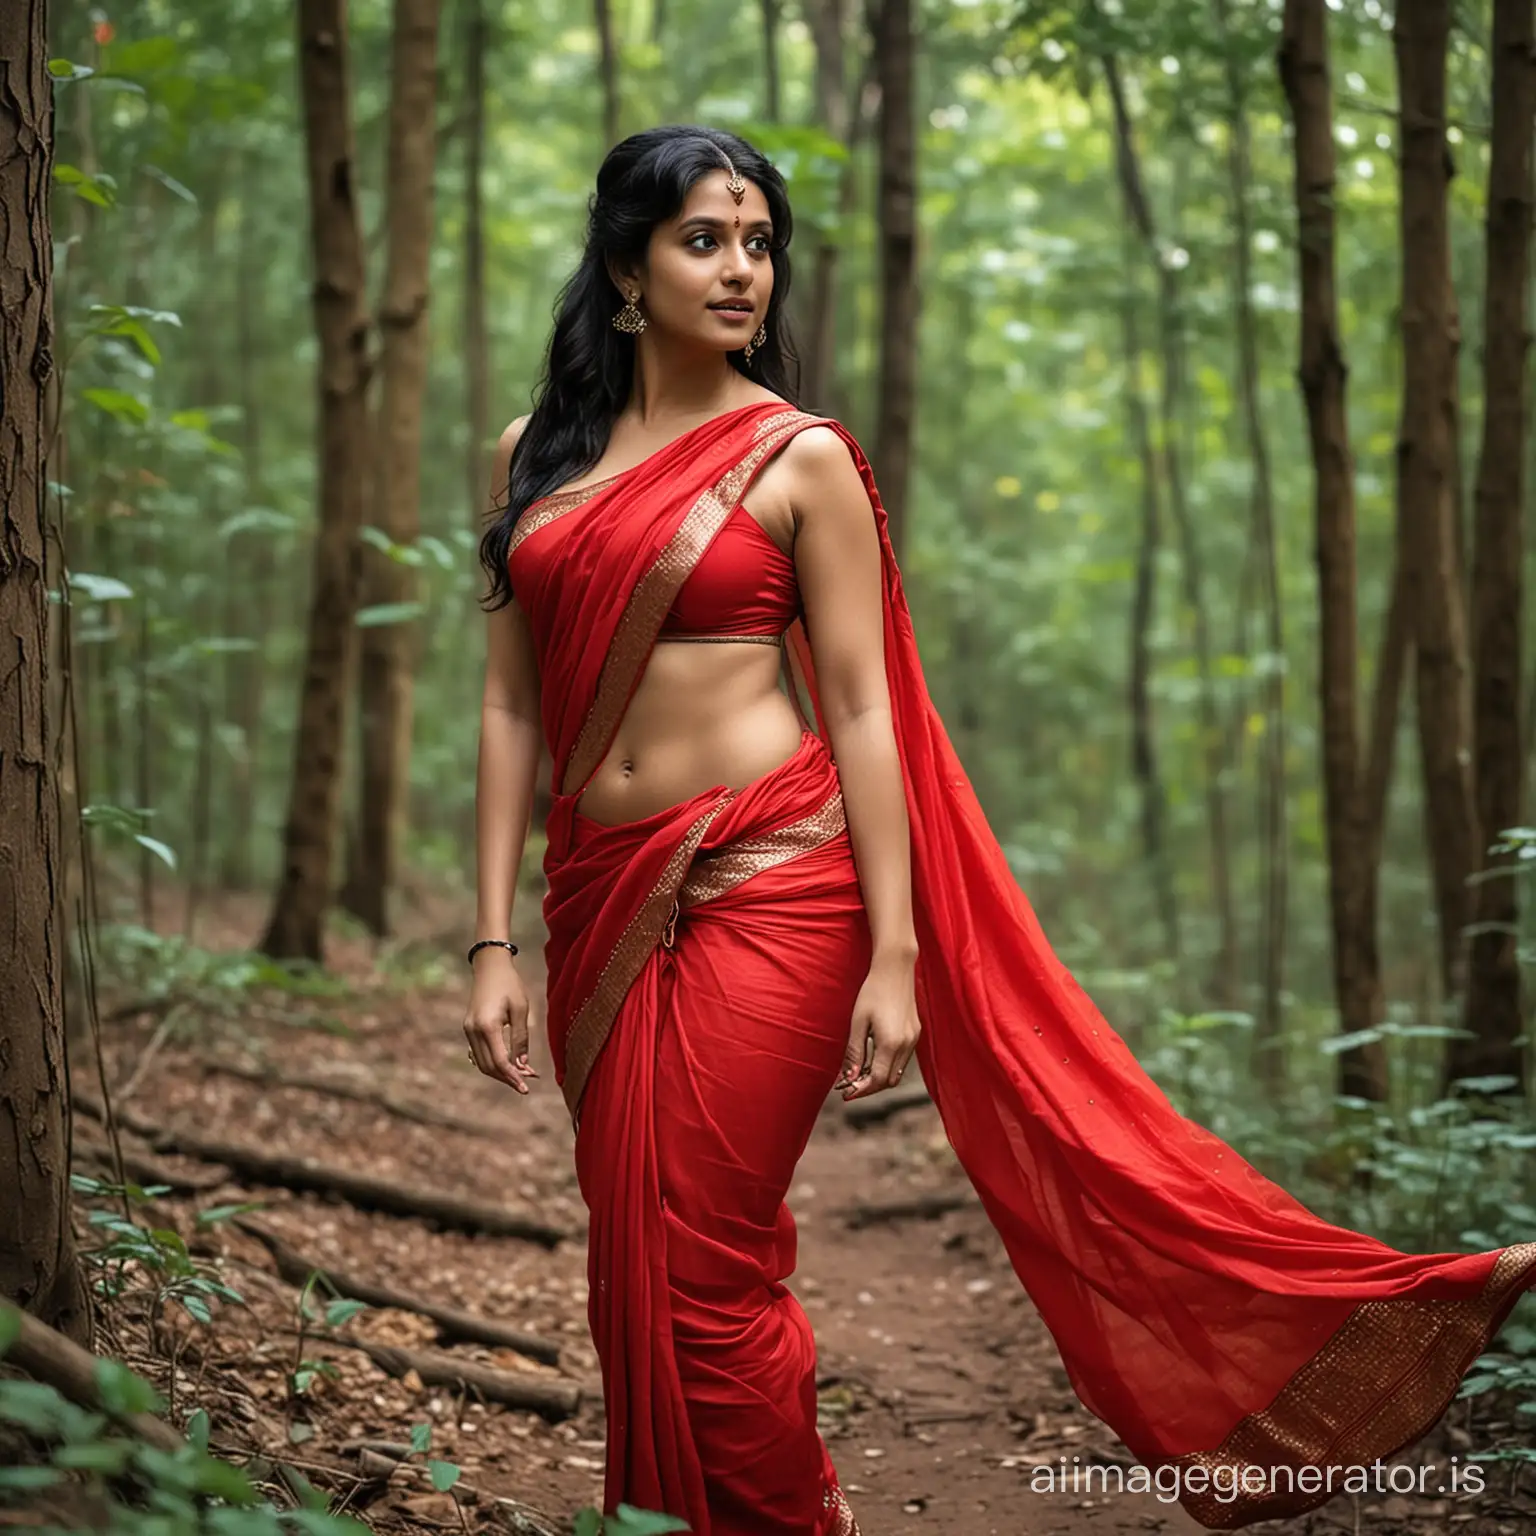 Sensual-Women-in-Red-Sarees-Embracing-Natures-Wilderness